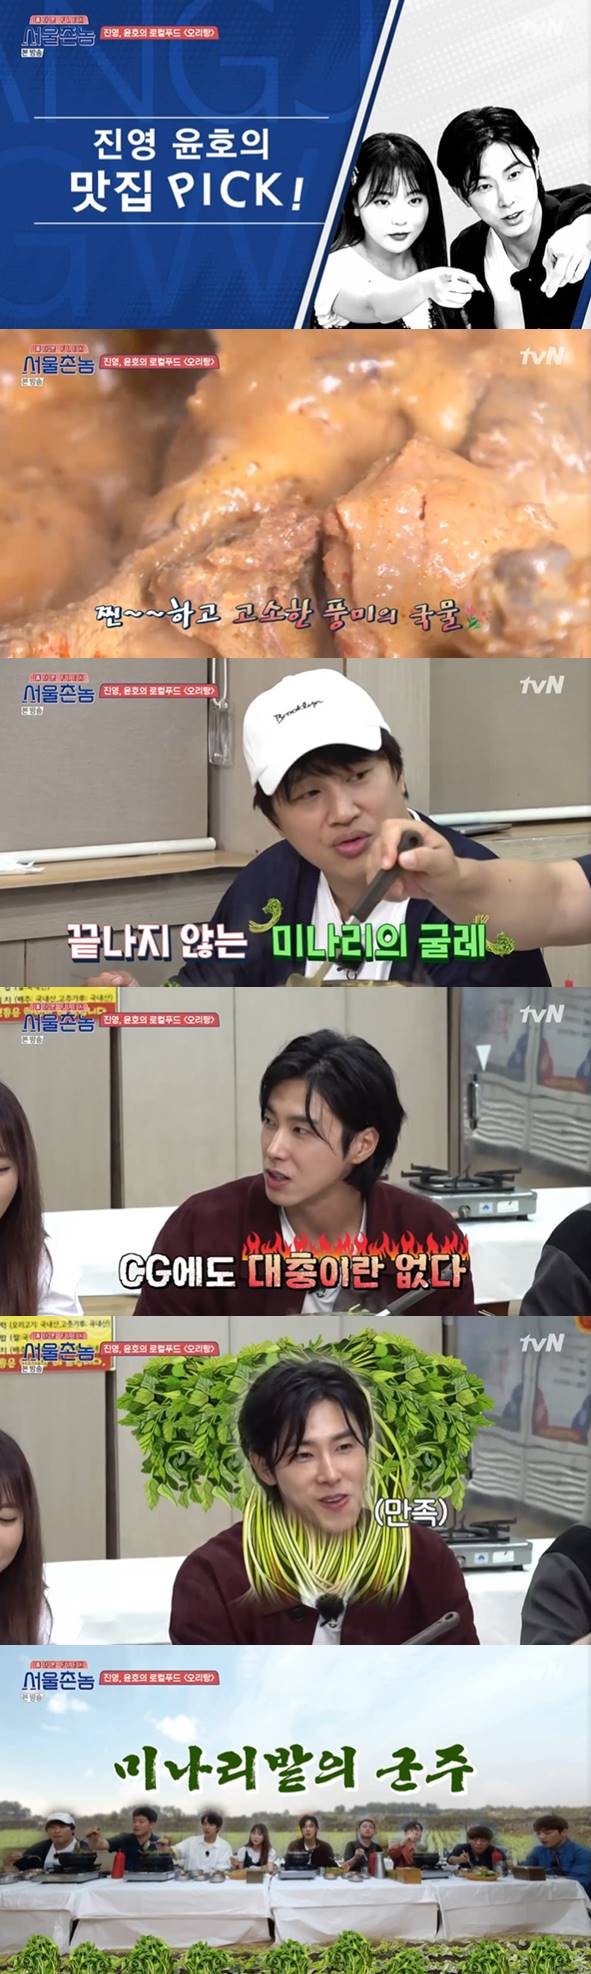 Hometown Flex  group TVXQs Yunho showed off passion at Mukbang as wellIn the TVN entertainment program Hometown Flex  broadcasted on the afternoon of the afternoon, Hometown Flex  Cha Tae-hyun and Lee Seung-gi left for the second home town Gwangju.Baseball player Kim Byung-hyun and singers TVXQ Yunho and Hong Jin-young appeared as Gwangju natives.Members who toured all day visited Hong Jin-young and Yunhos local food restaurant, Oritang House.After arriving at the restaurant, Hong Jin-young said, Do you think you lost a little weight after dancing? and Yunho added, It seems like a blood circulation.Next to it, Cha Tae-hyun and Lee Seung-gi were knocked over the table in a weary tone.Lee Seung-gi was satisfied with eating oritang and saying it was drugs.Kim Byung-hyun said there were a lot of Baseball player coming, and Yunho was motivated to get back to the rest of the day so we can go to the next schedule.Weary Cha Tae-hyun laughed when he said, Jeong Yunho, you go home.